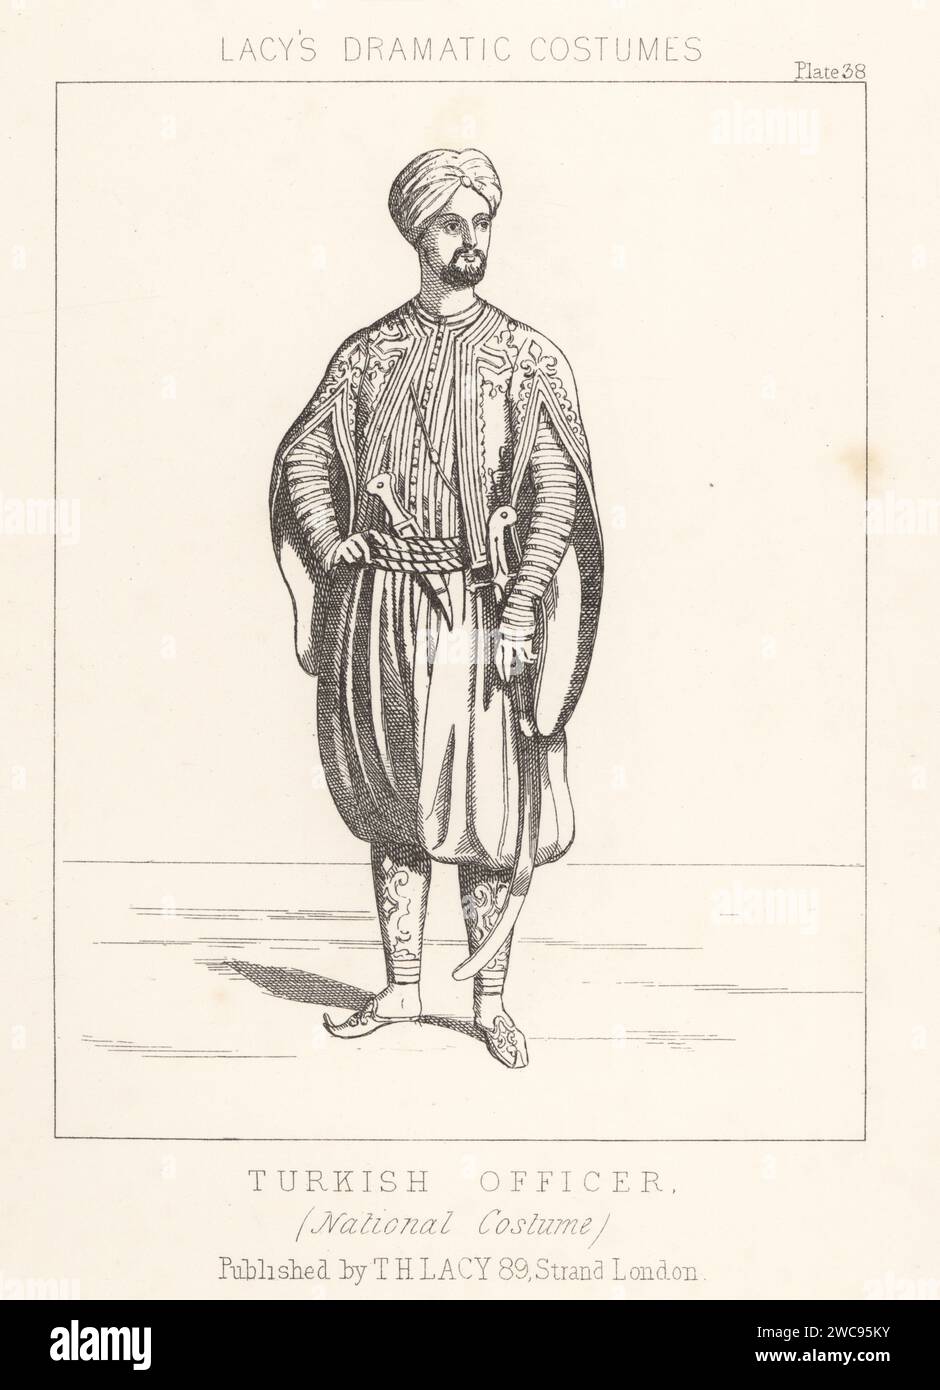 Uniform of a Turkish officer, 19th century. In turban, jacket, salvar pants, slippers, with dagger and scimitar. National costume. Lithograph from Thomas Hailes Lacy's Male Costumes, Historical, National and Dramatic in 200 Plates, London, 1865. Lacy (1809-1873) was a British actor, playwright, theatrical manager and publisher. Stock Photo